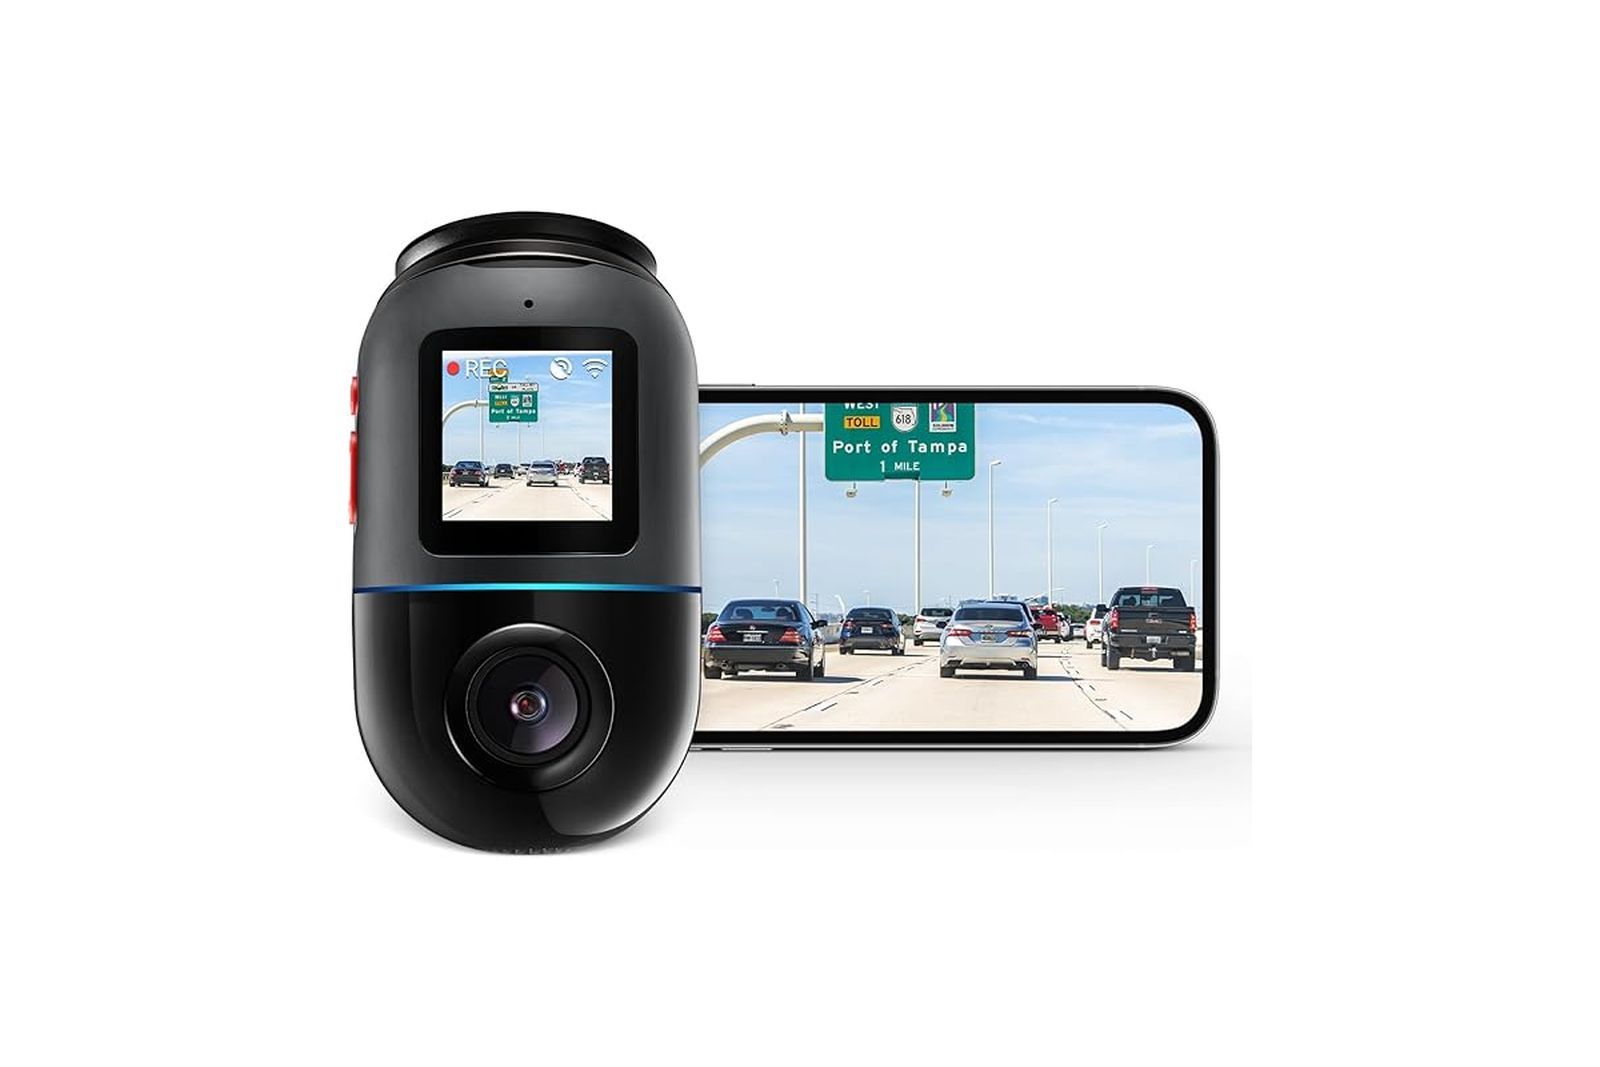 Miofive's 4K Two-Camera Dashcam System Enables More Focus On Safe Driving